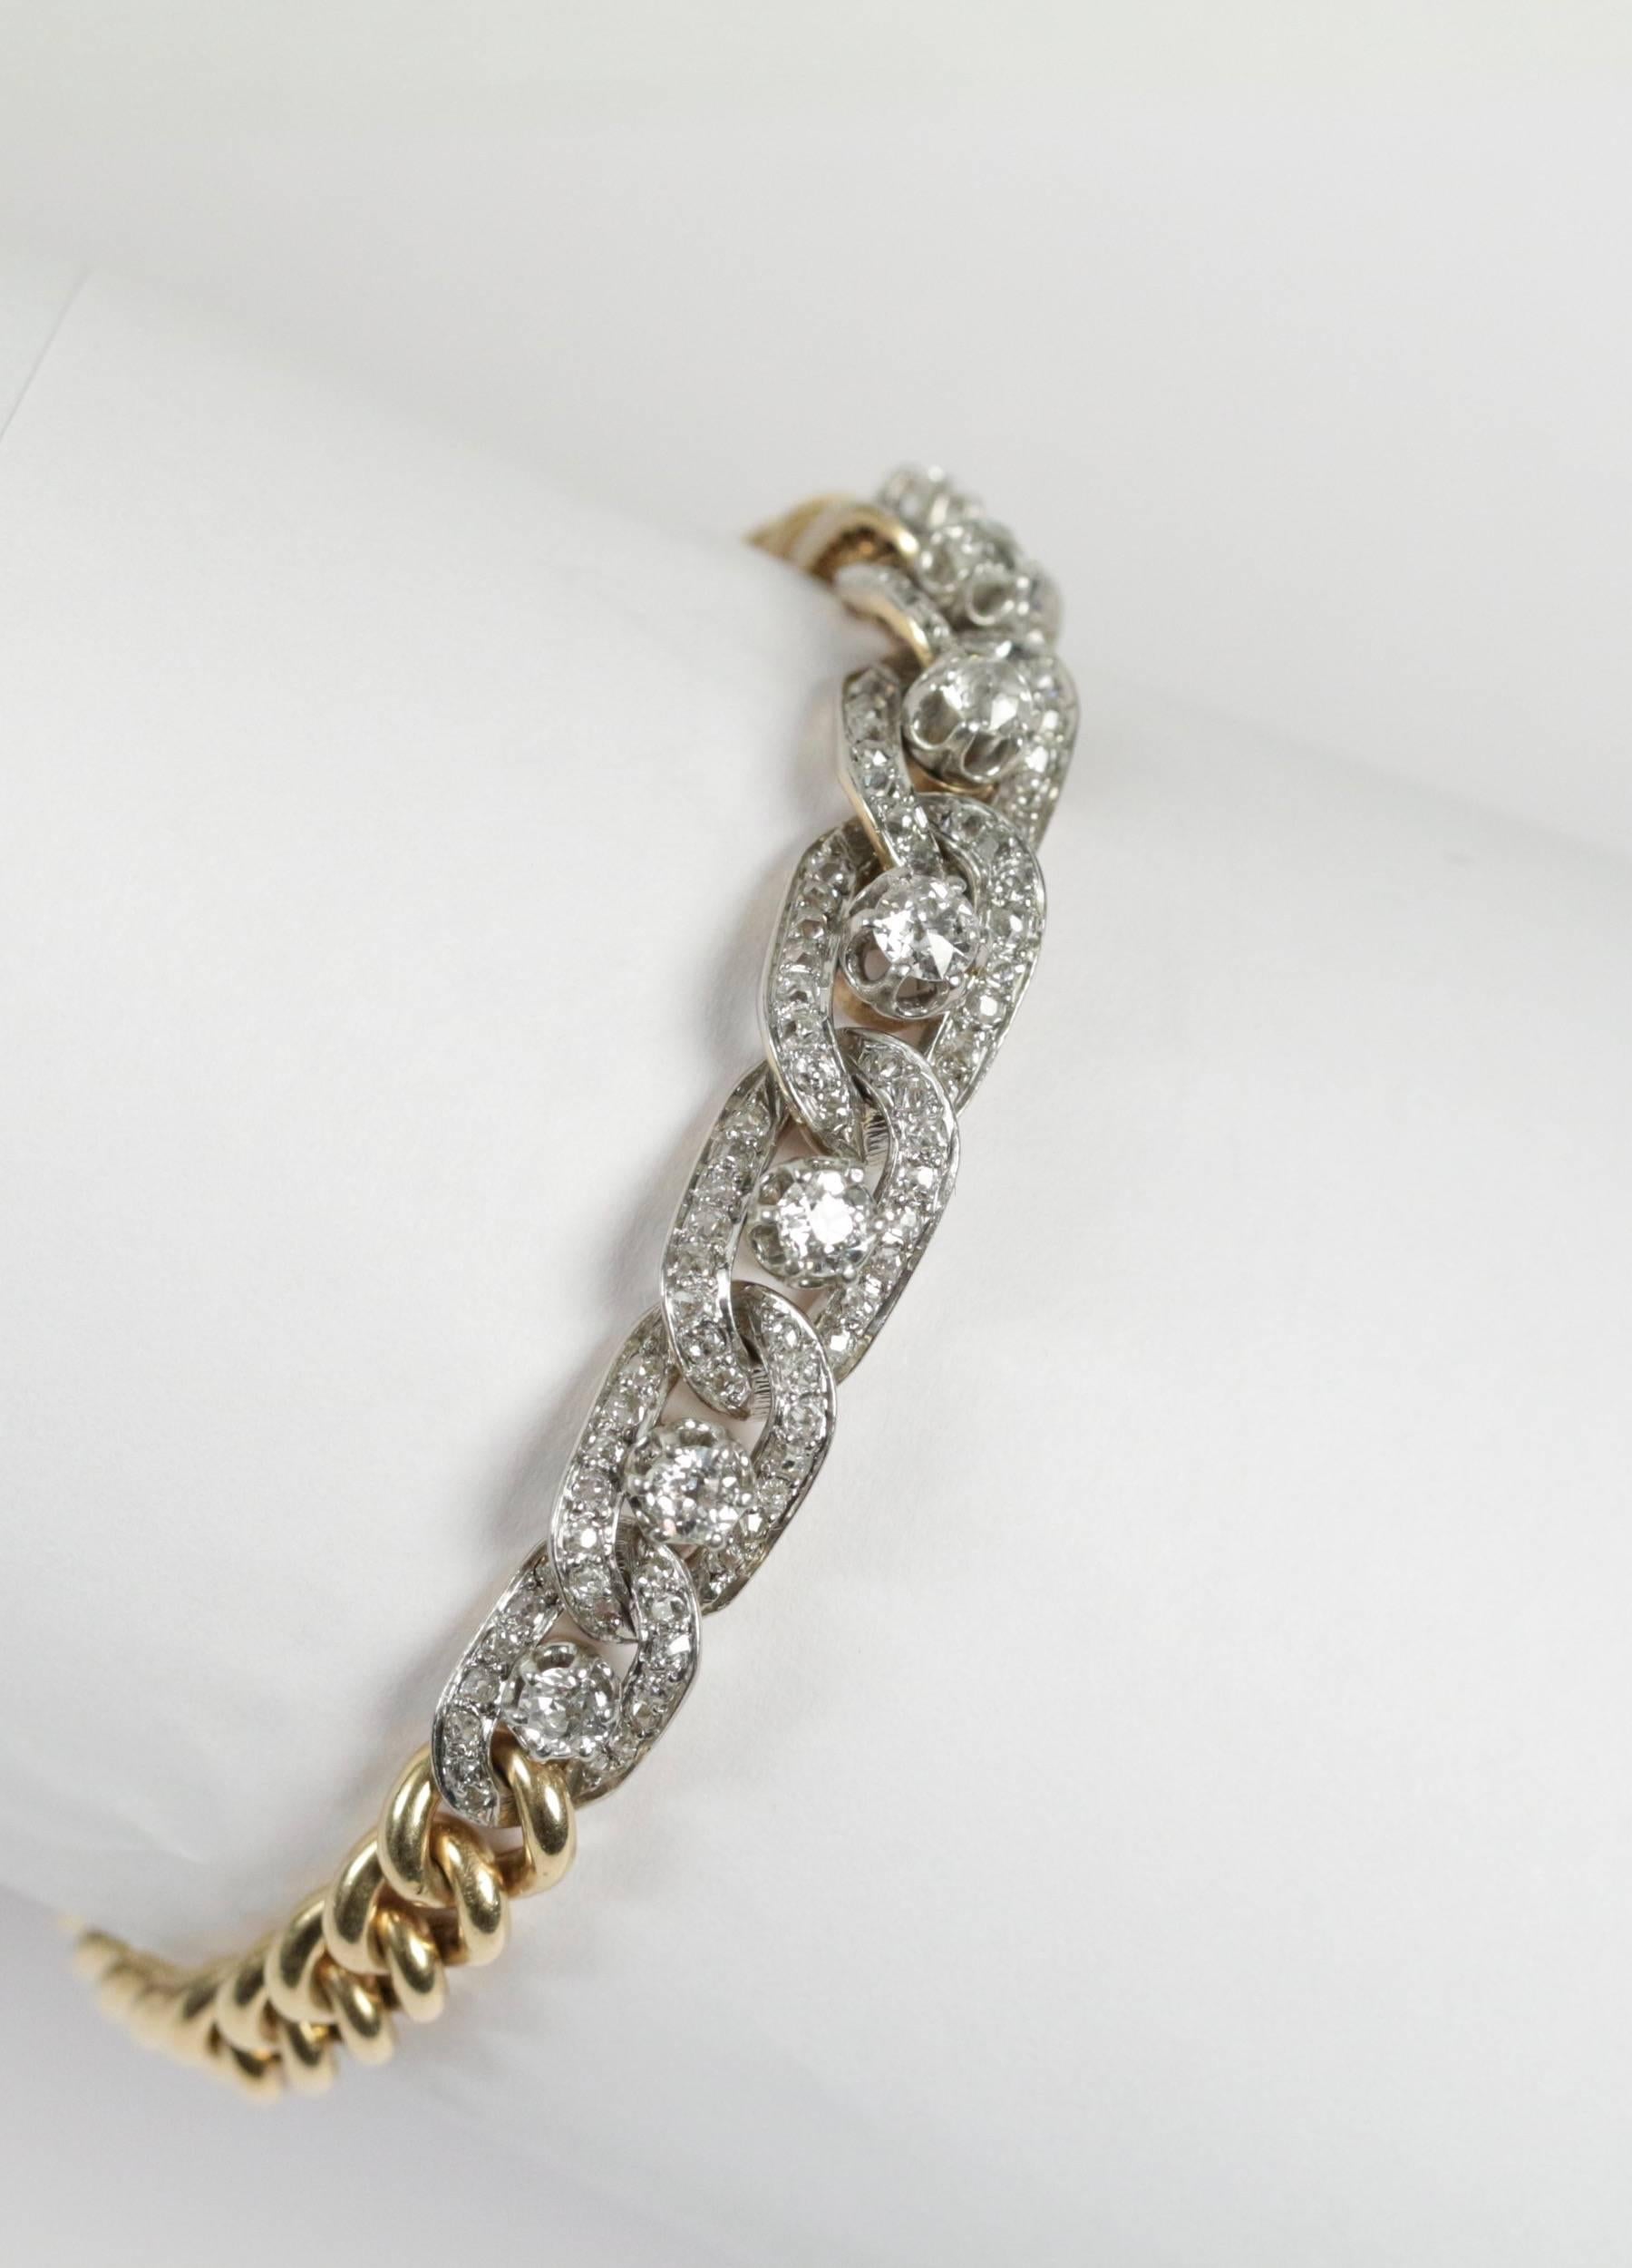 18k yellow gold and platinum link bracelet set with brillant cut diamonds (approximate total weight estimated to 4ct). 

